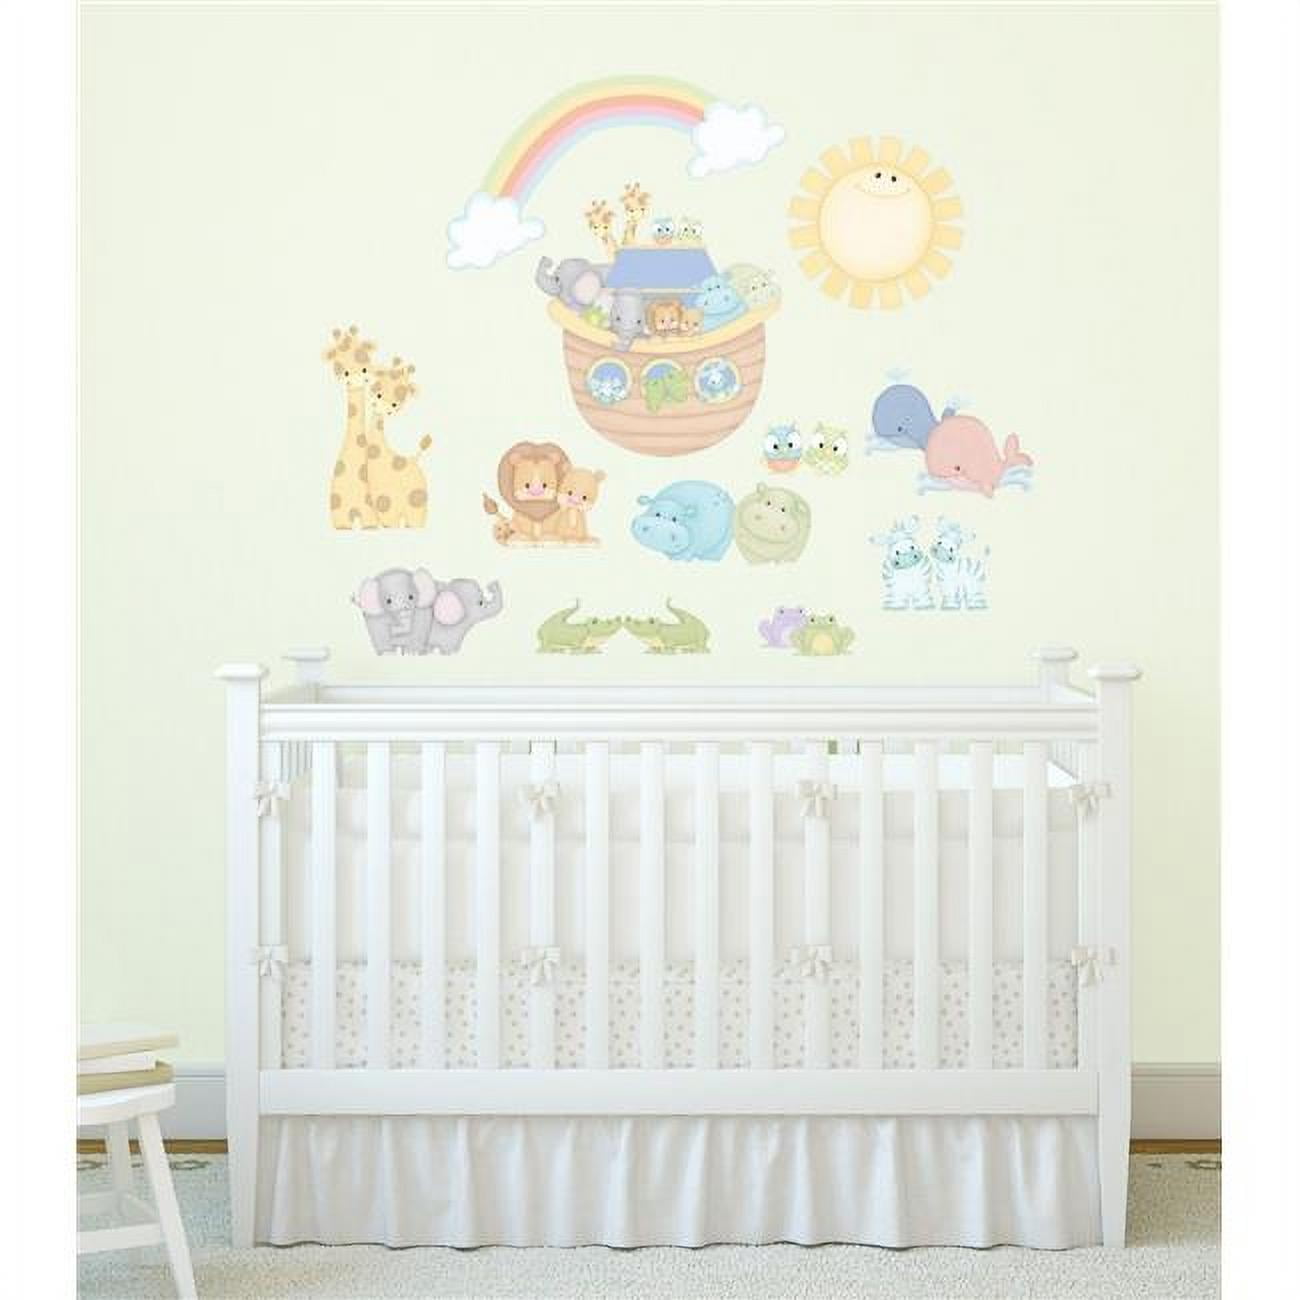 10024 Noahs Pastel Pairs Applique Wall Decal Stickers, Blue - Super Jumbo